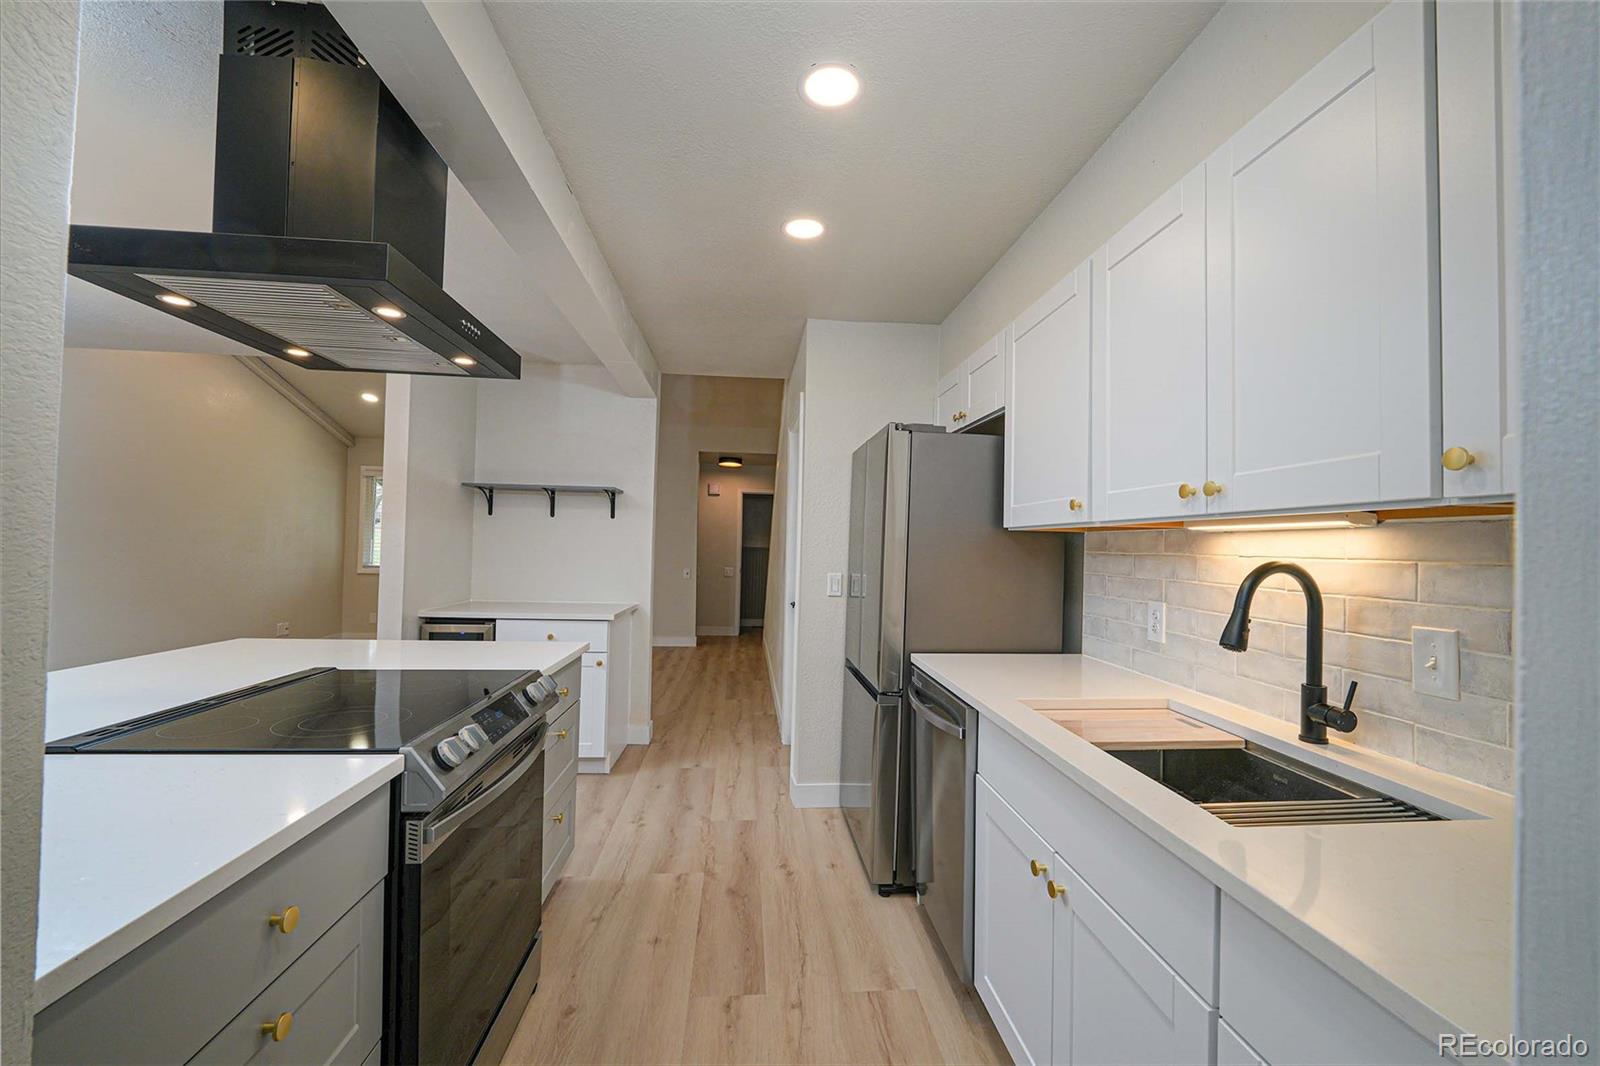 a kitchen with stainless steel appliances a sink dishwasher and a stove with wooden floor